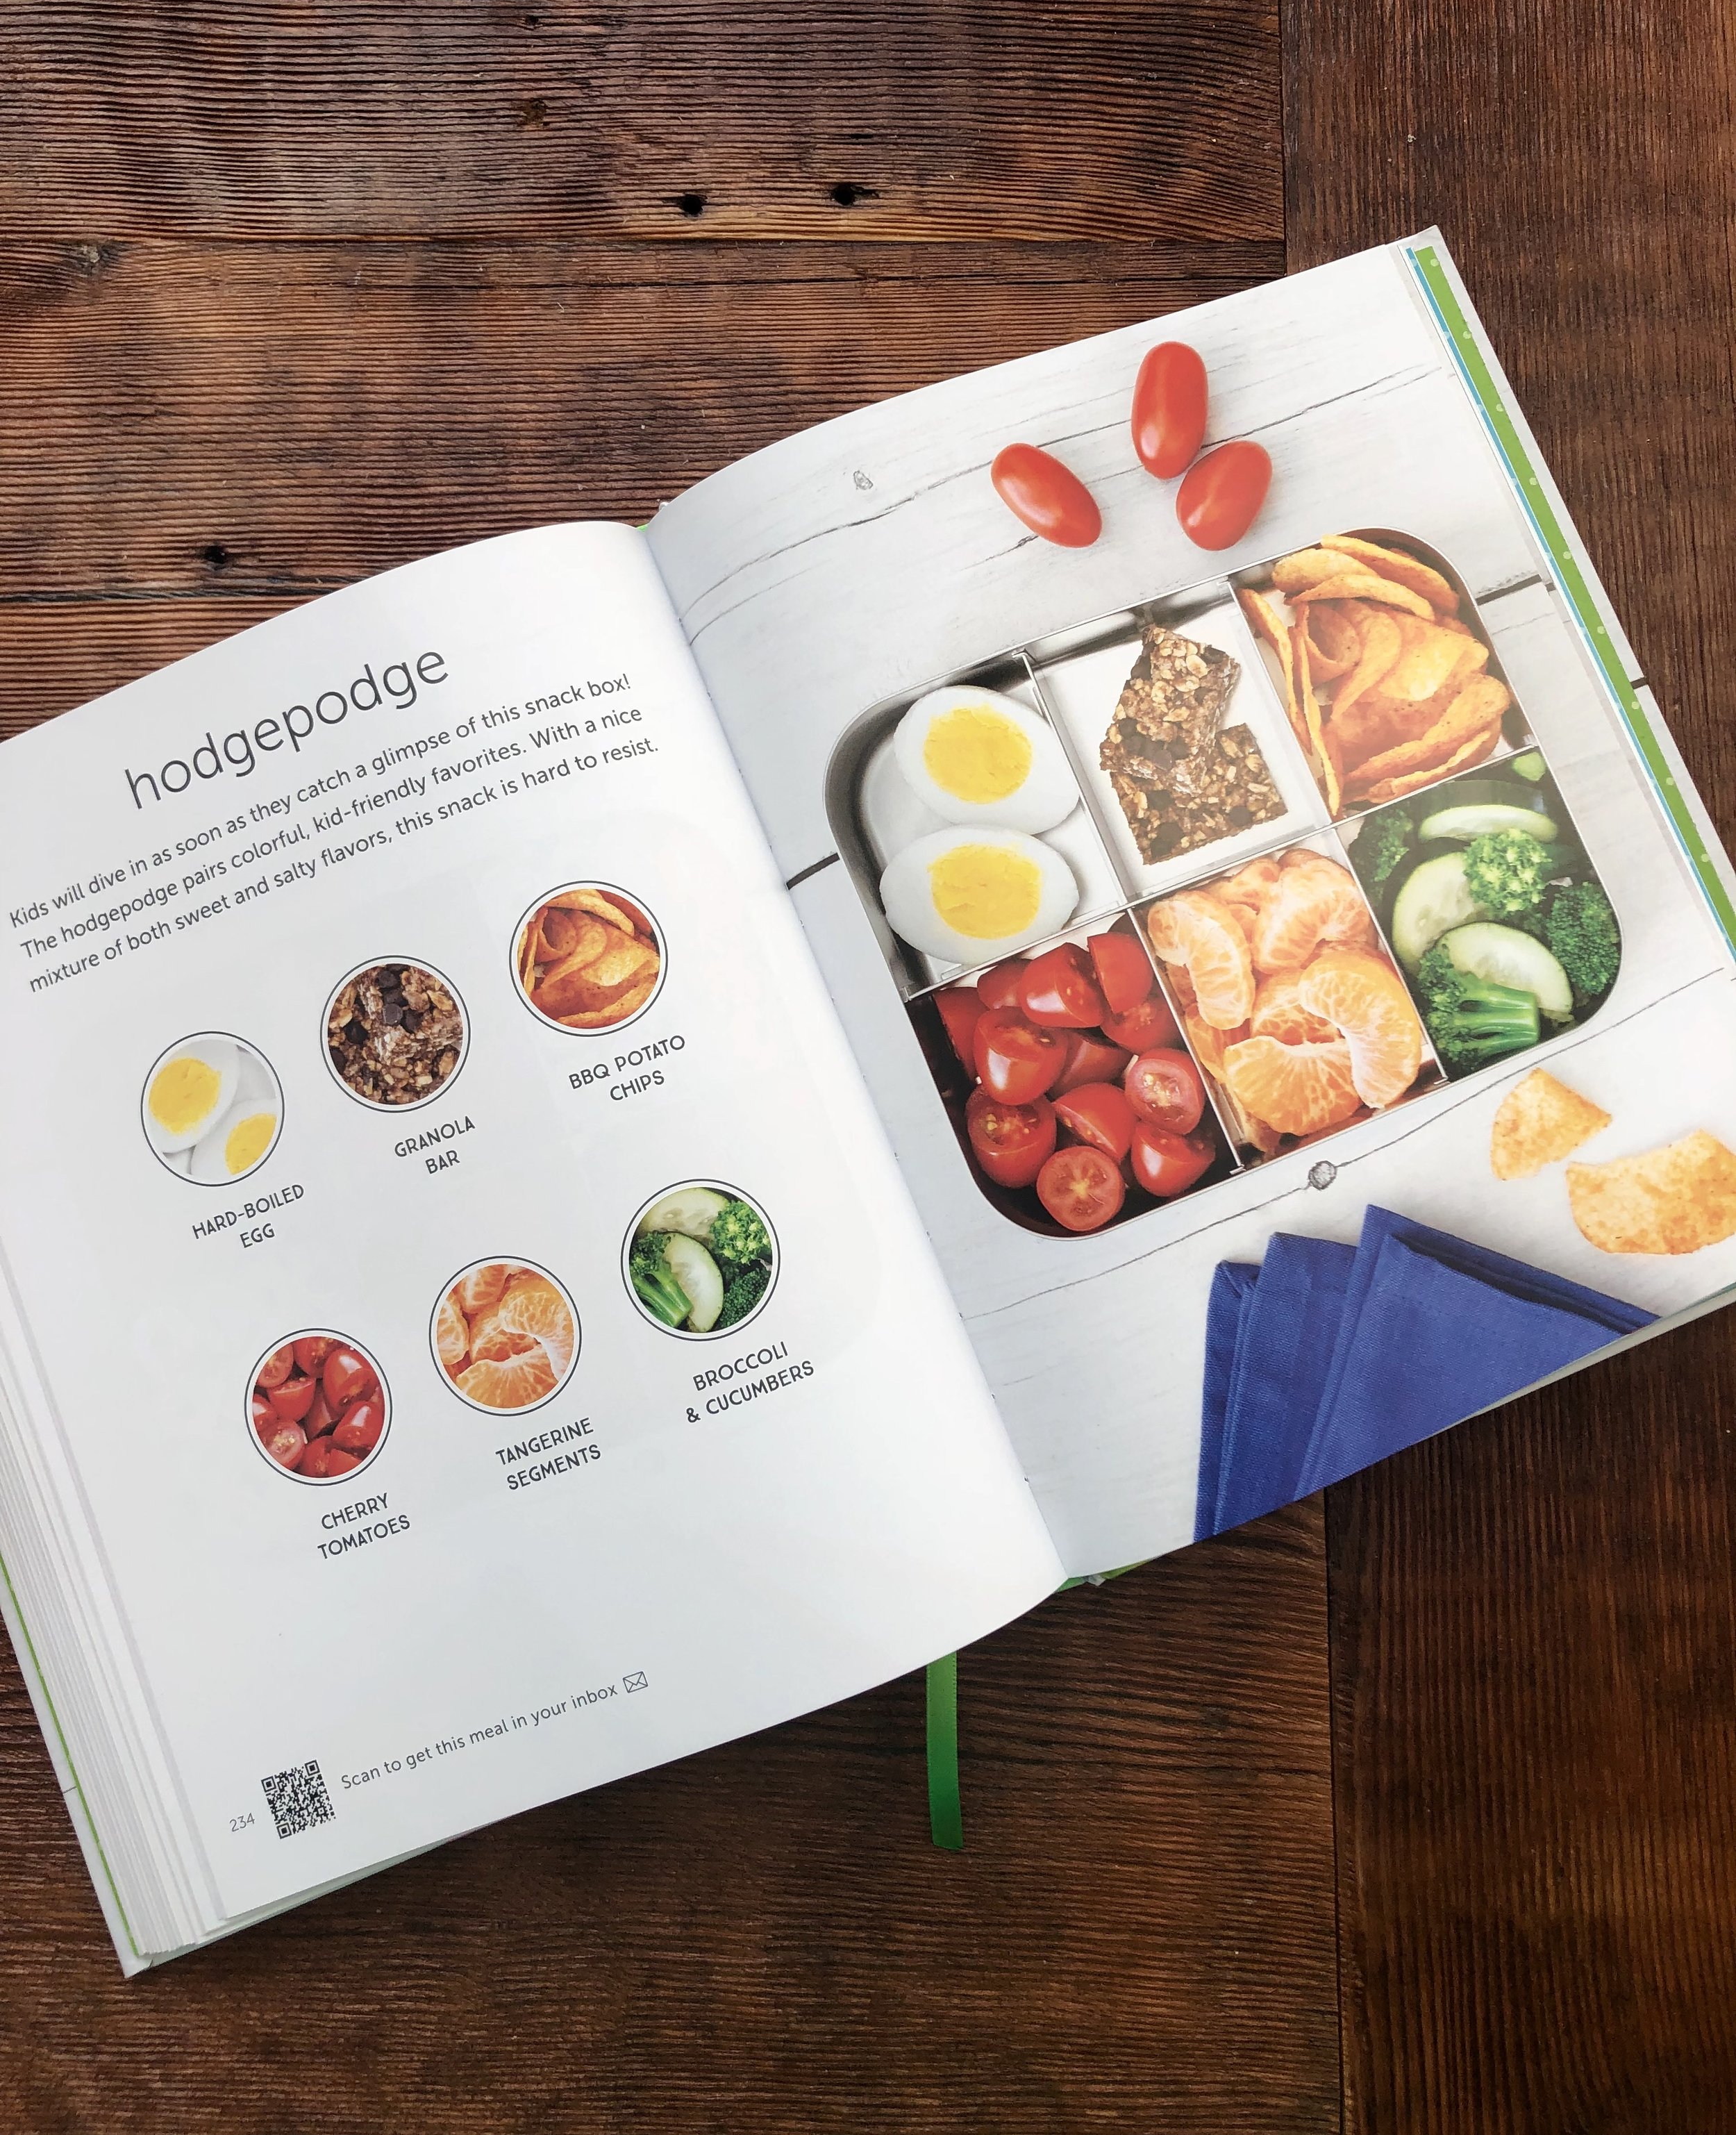 100+ Lunchbox Ideas: Quick, Easy, and Packable Lunch Recipes that are  Perfect for School, Work or Any Adventure: Nutrition, Basic: 9798846715356:  : Books